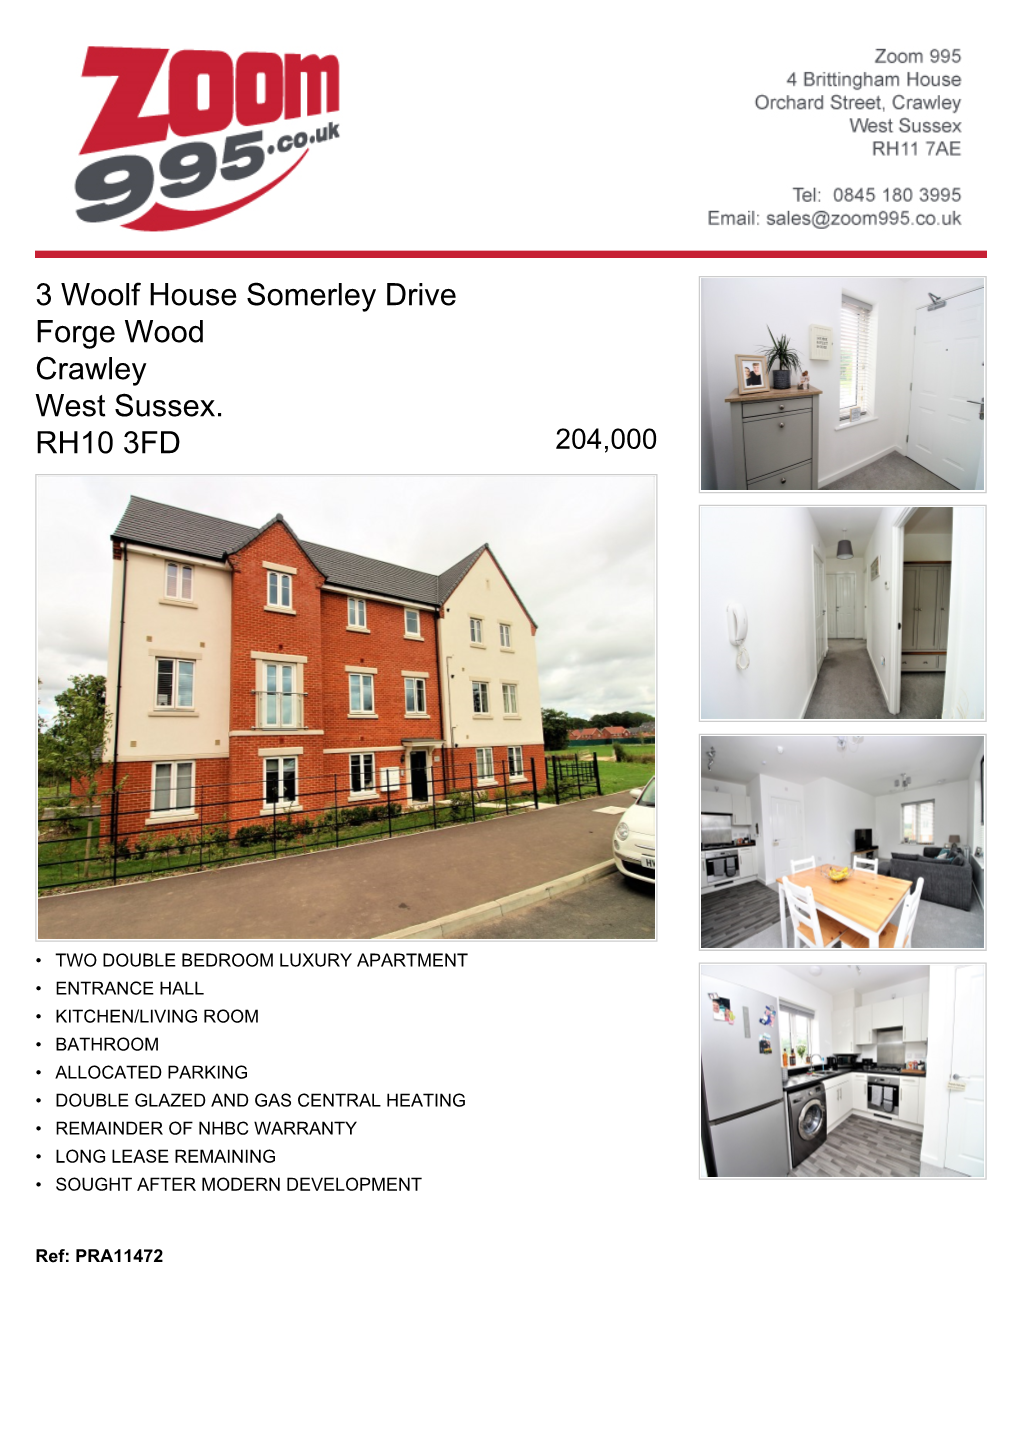 3 Woolf House Somerley Drive Forge Wood Crawley West Sussex. RH10 3FD 204,000